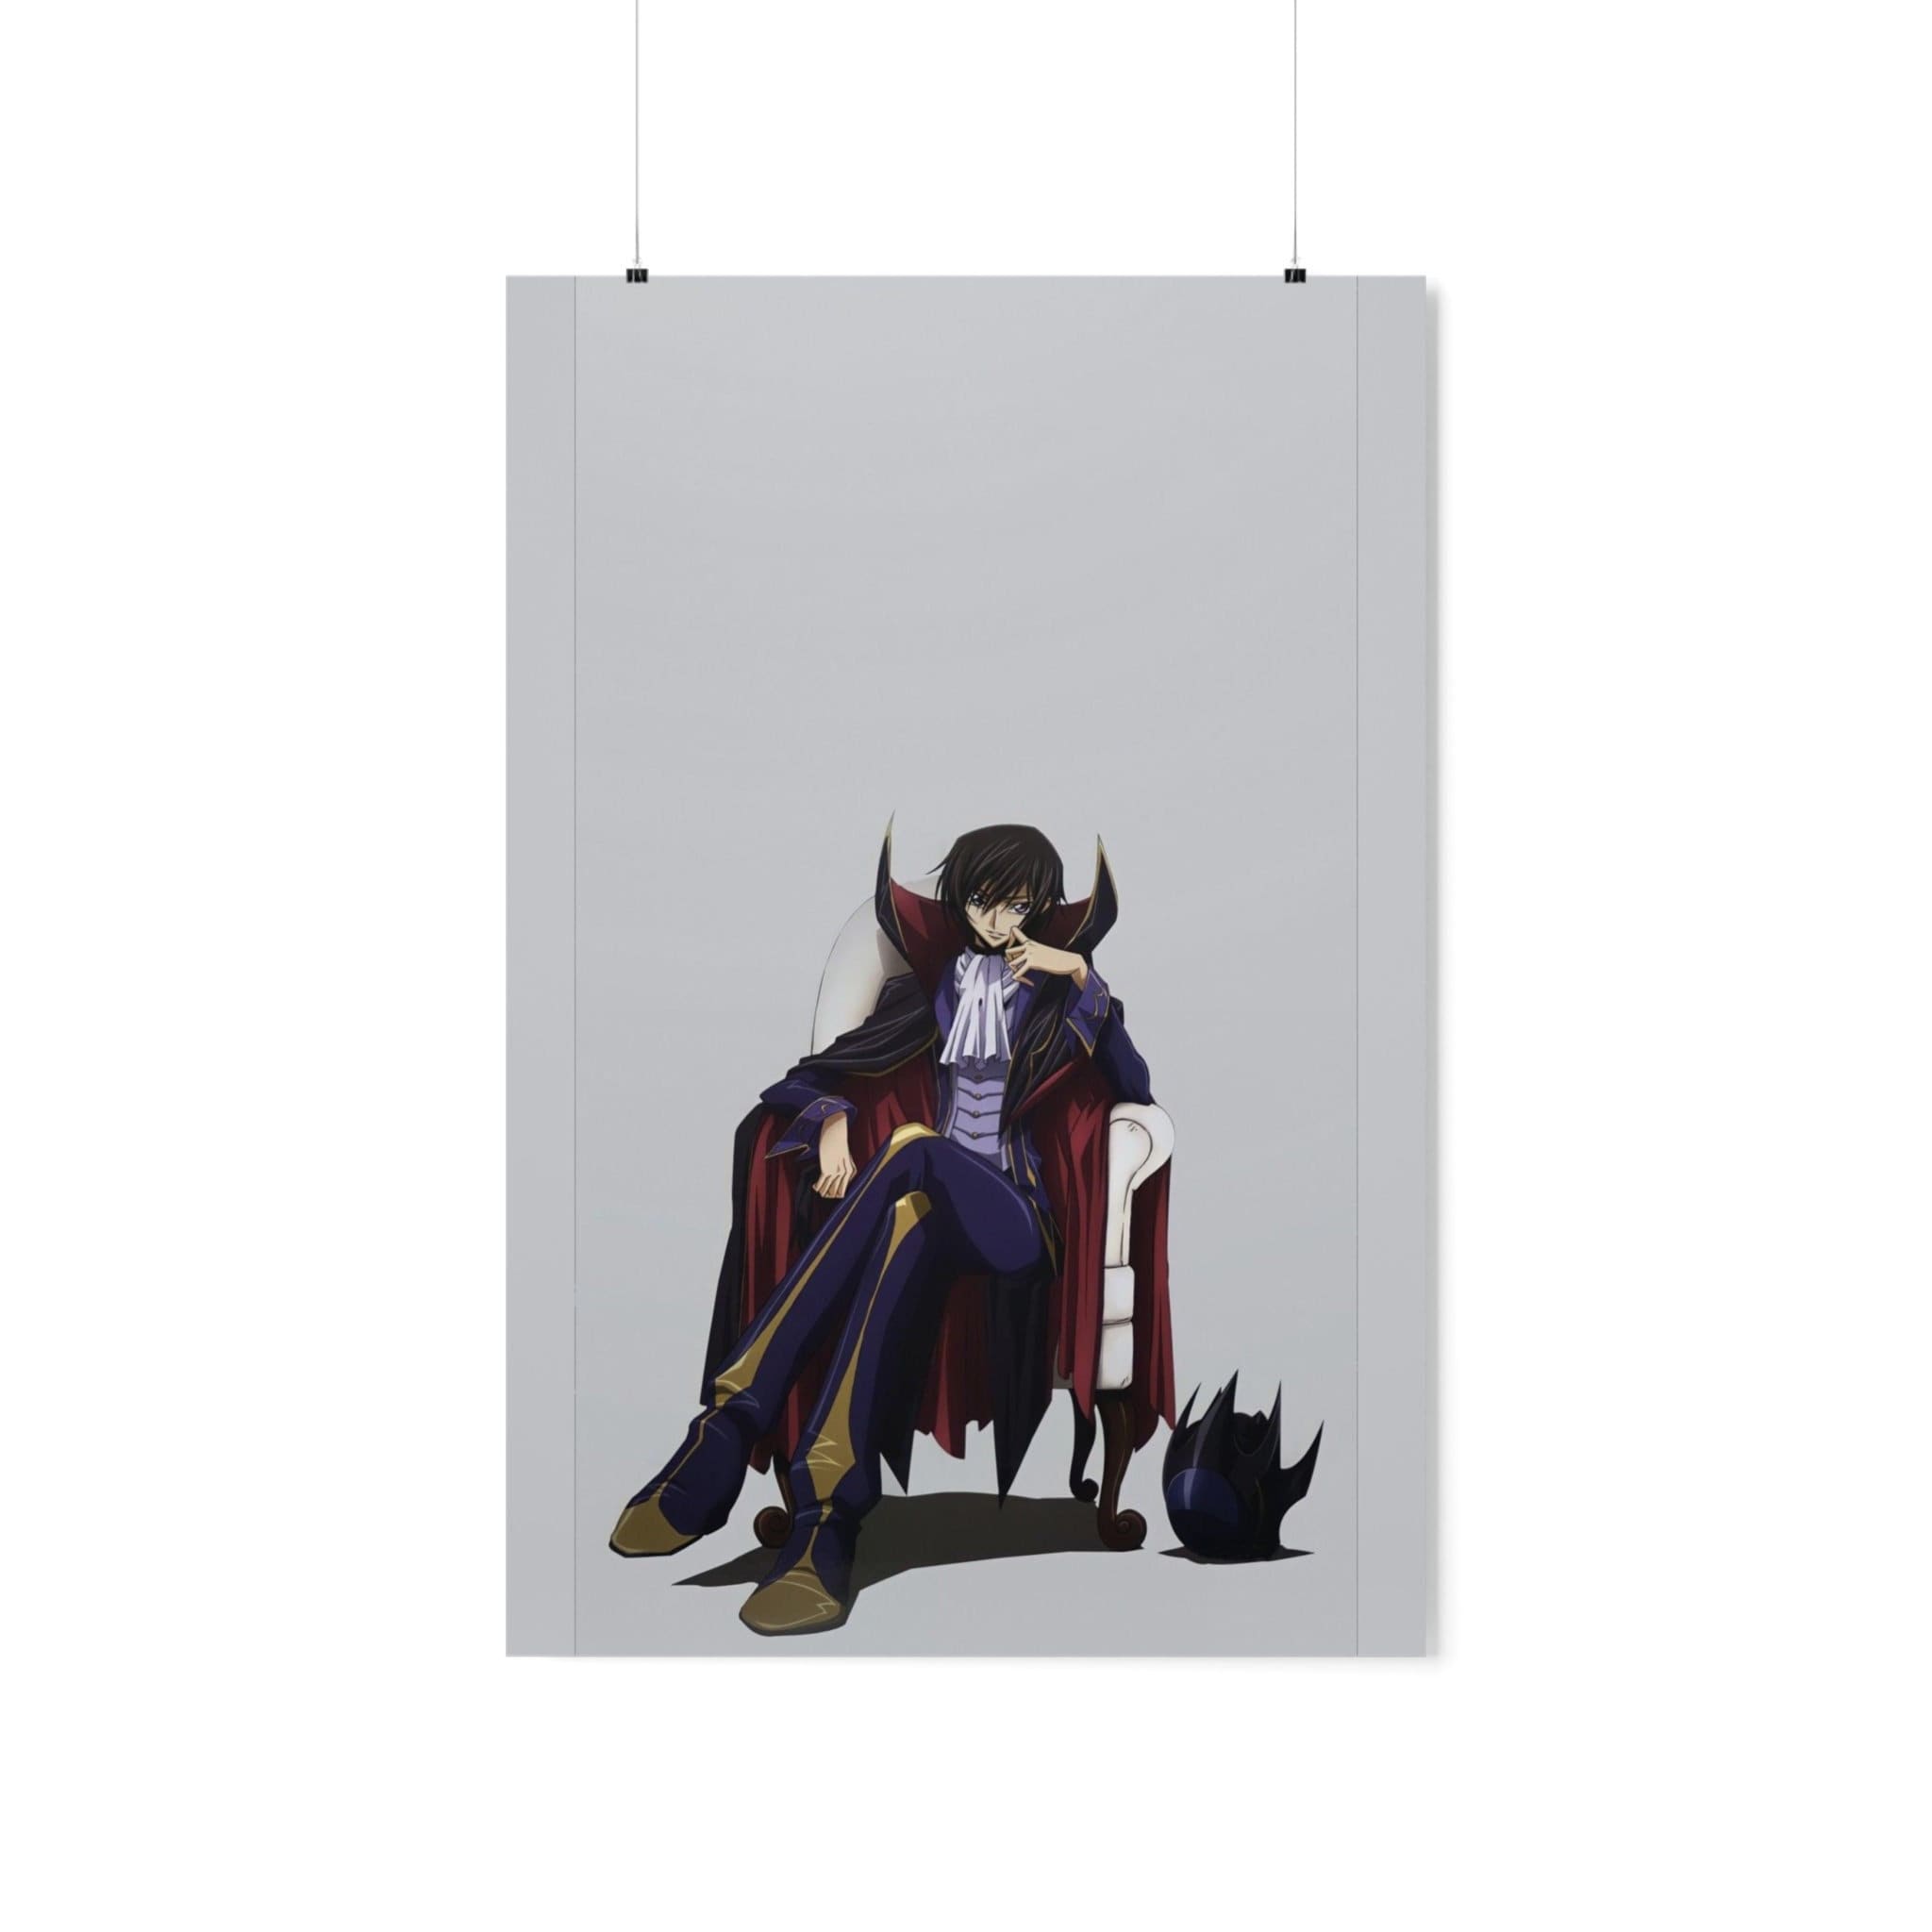 Poster Anime Code Geass Lelouch Lamperouge sl-14026 (LARGE